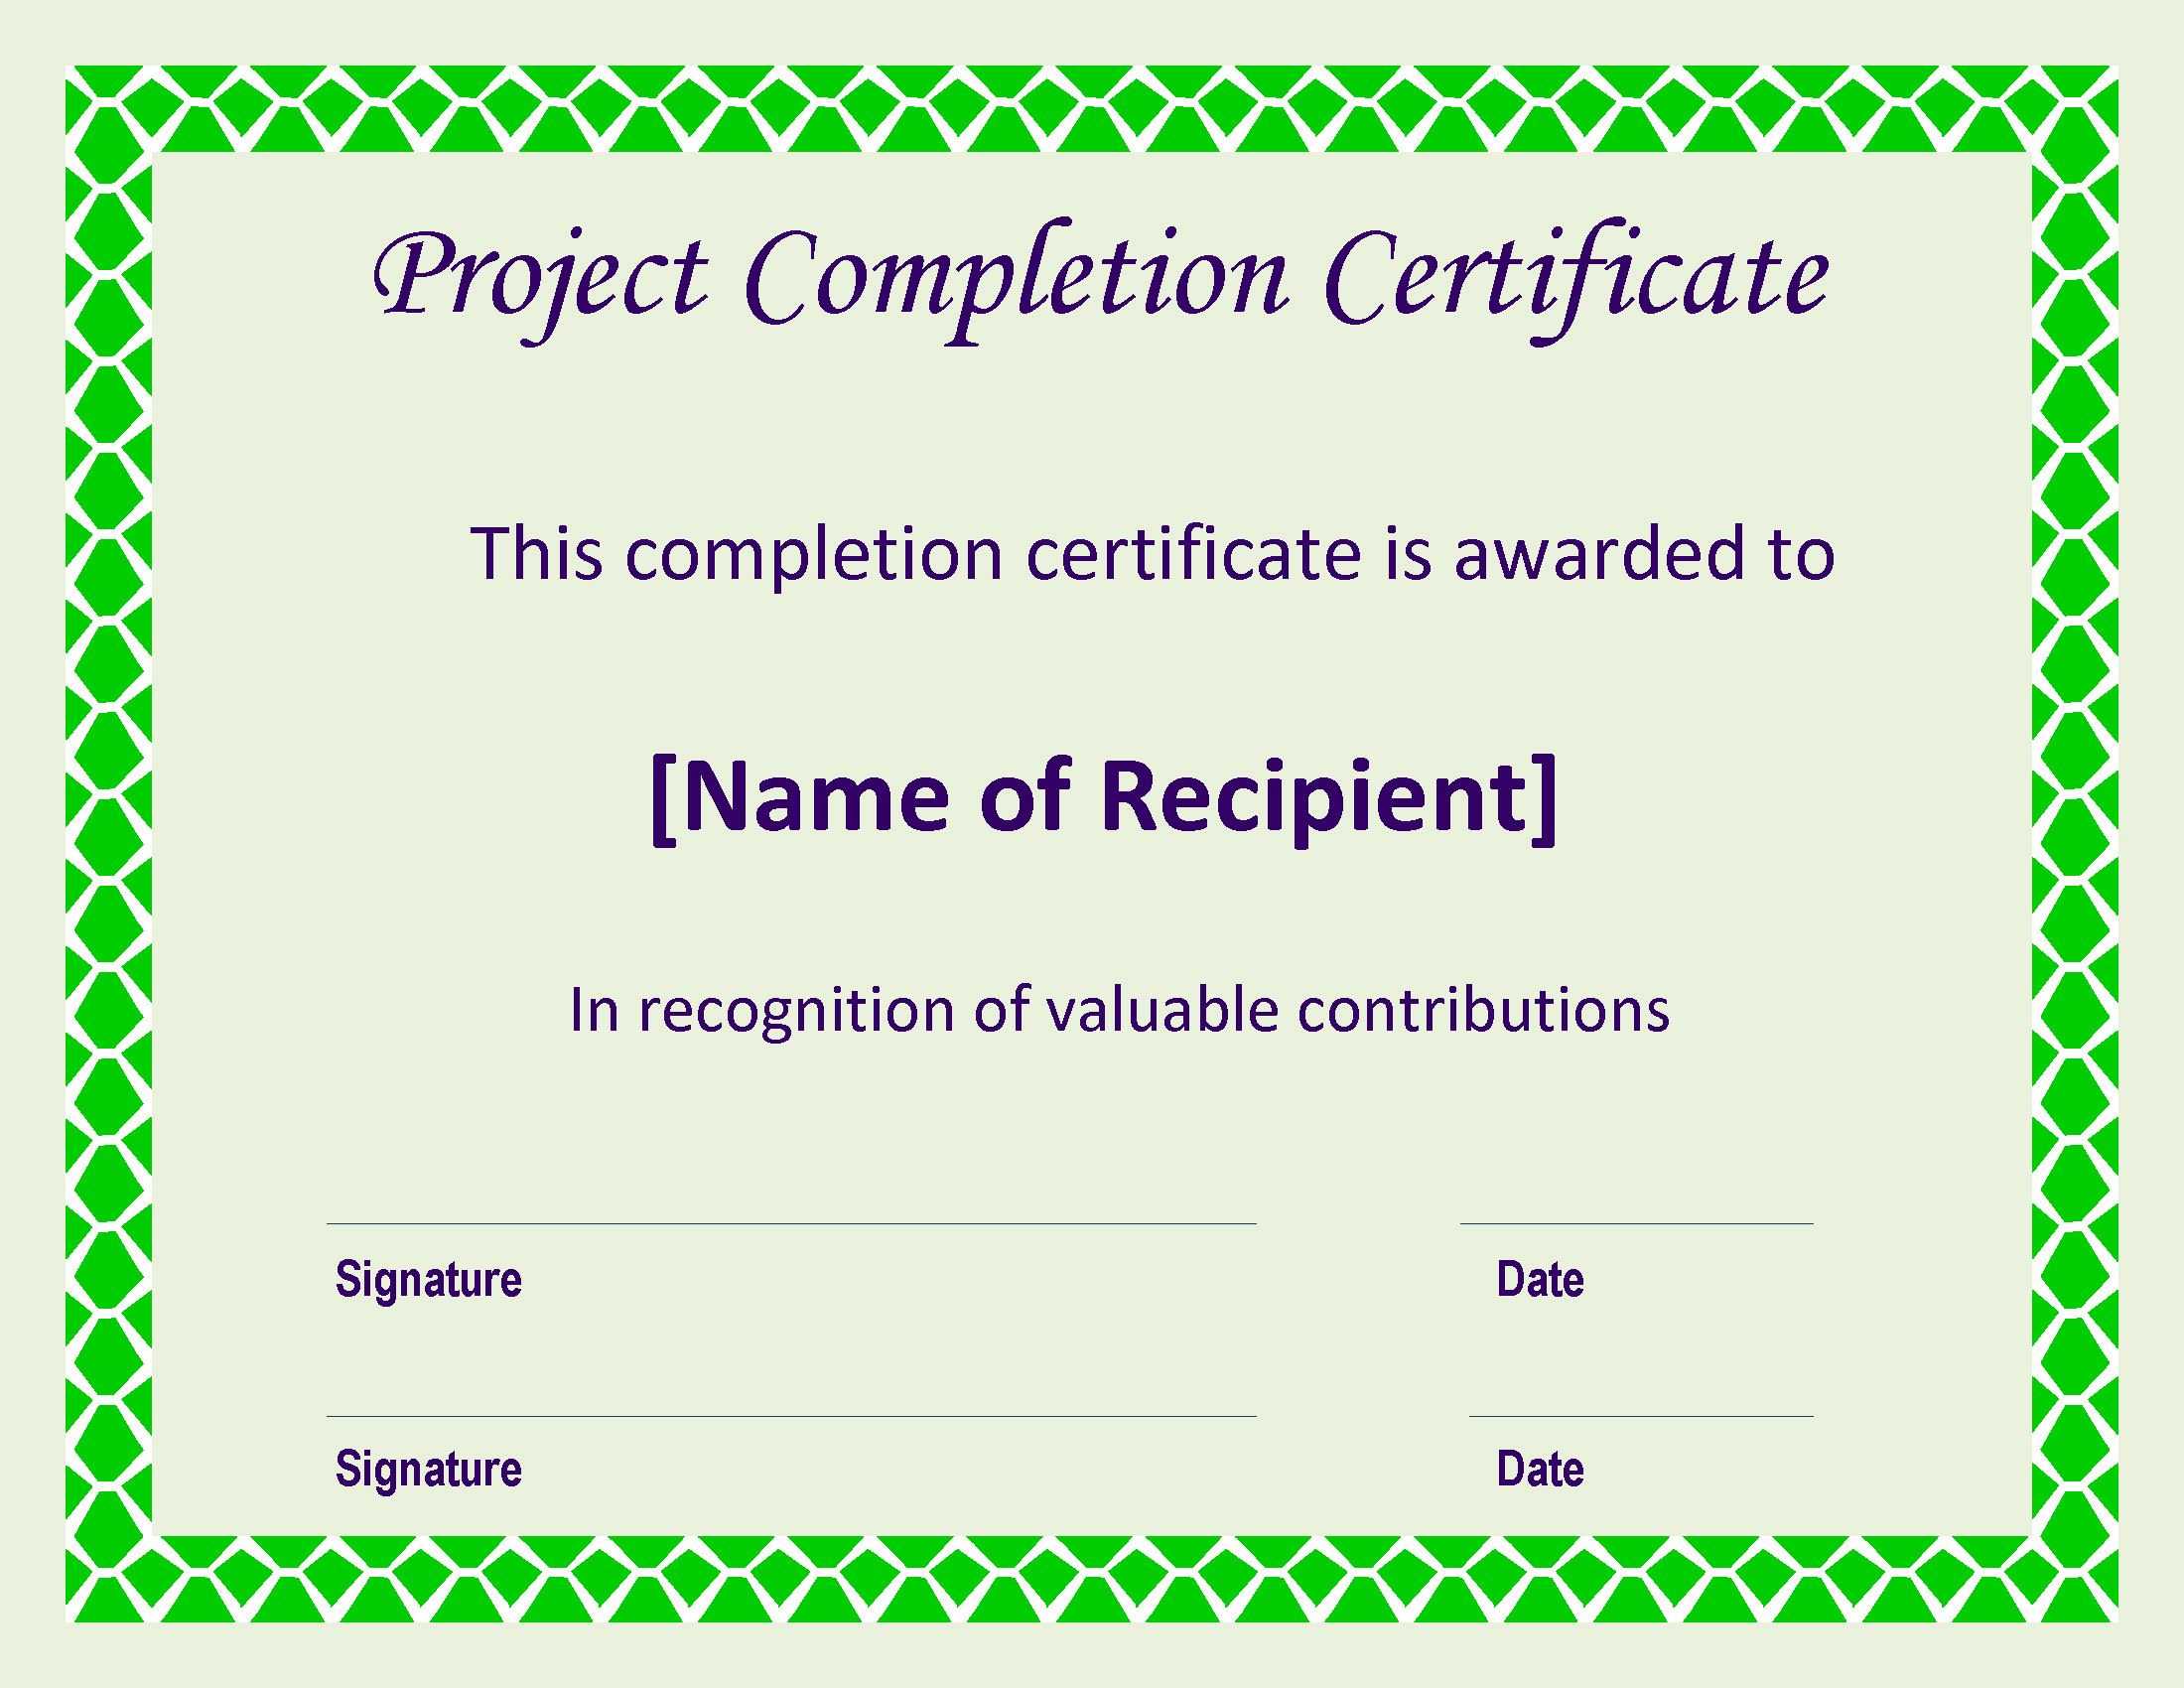 Certificate Of Completion Project | Templates At In Certificate Of Completion Template Construction